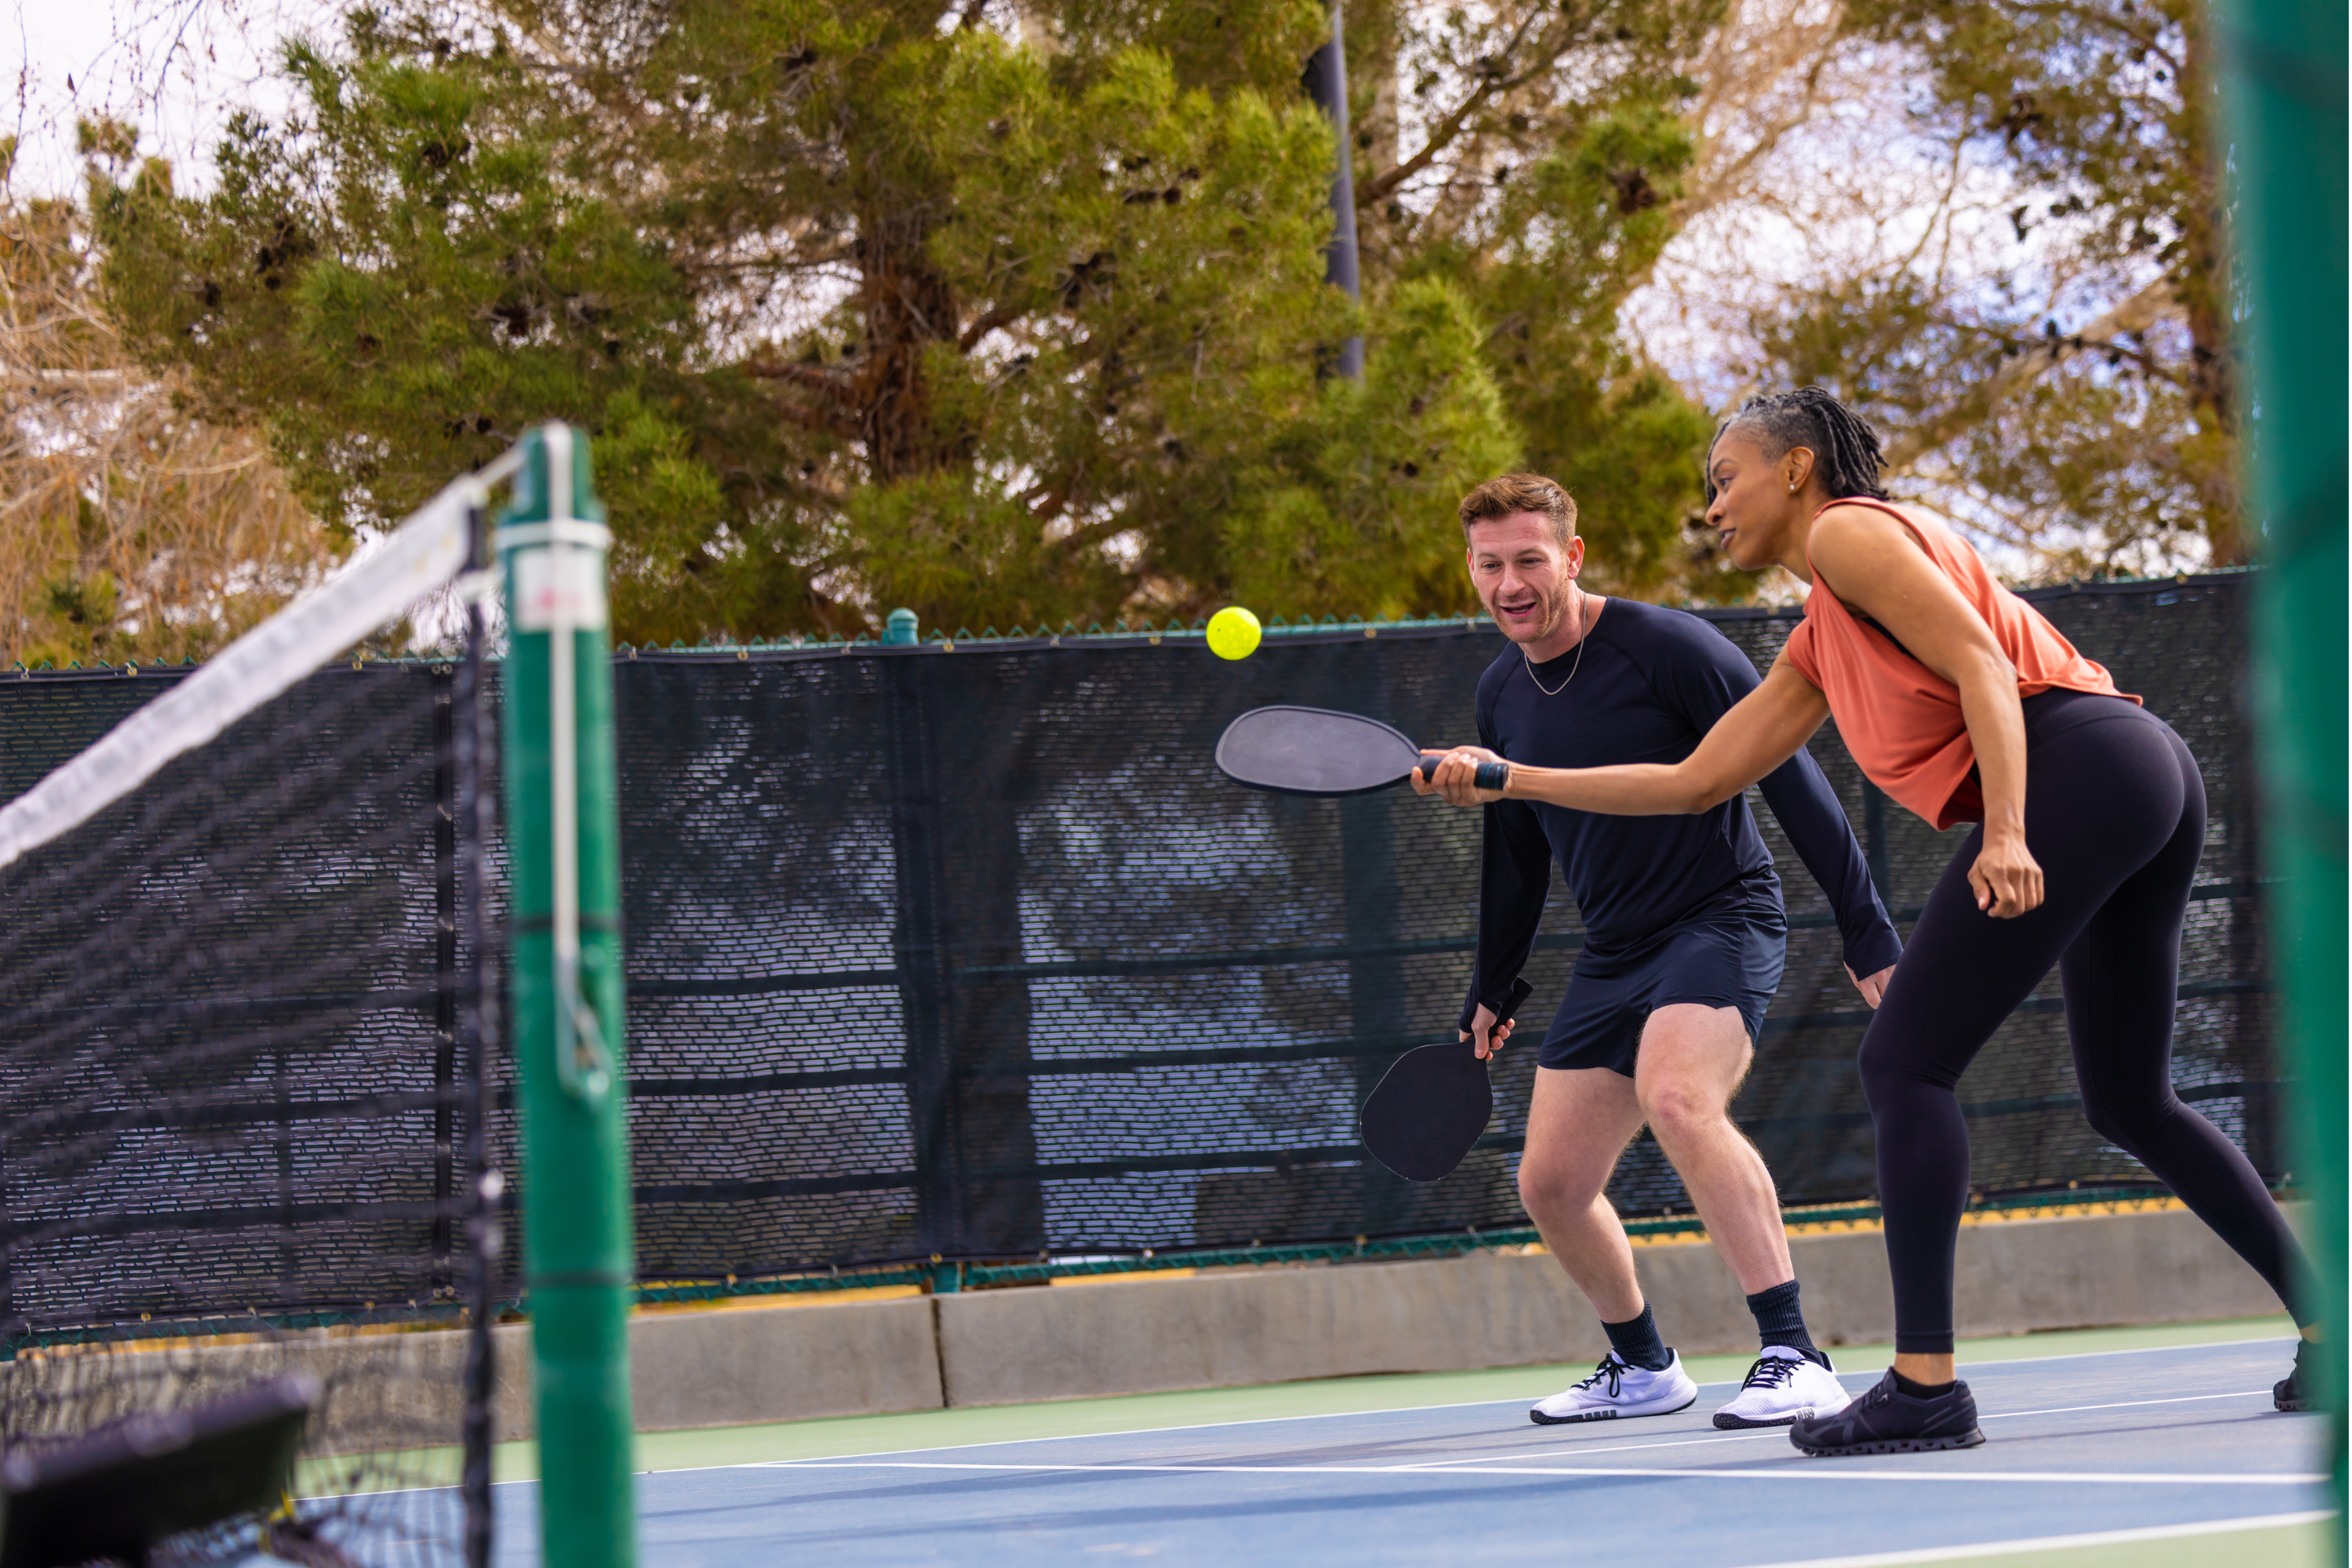 10 Important Pickleball Rules Every Player Should Know